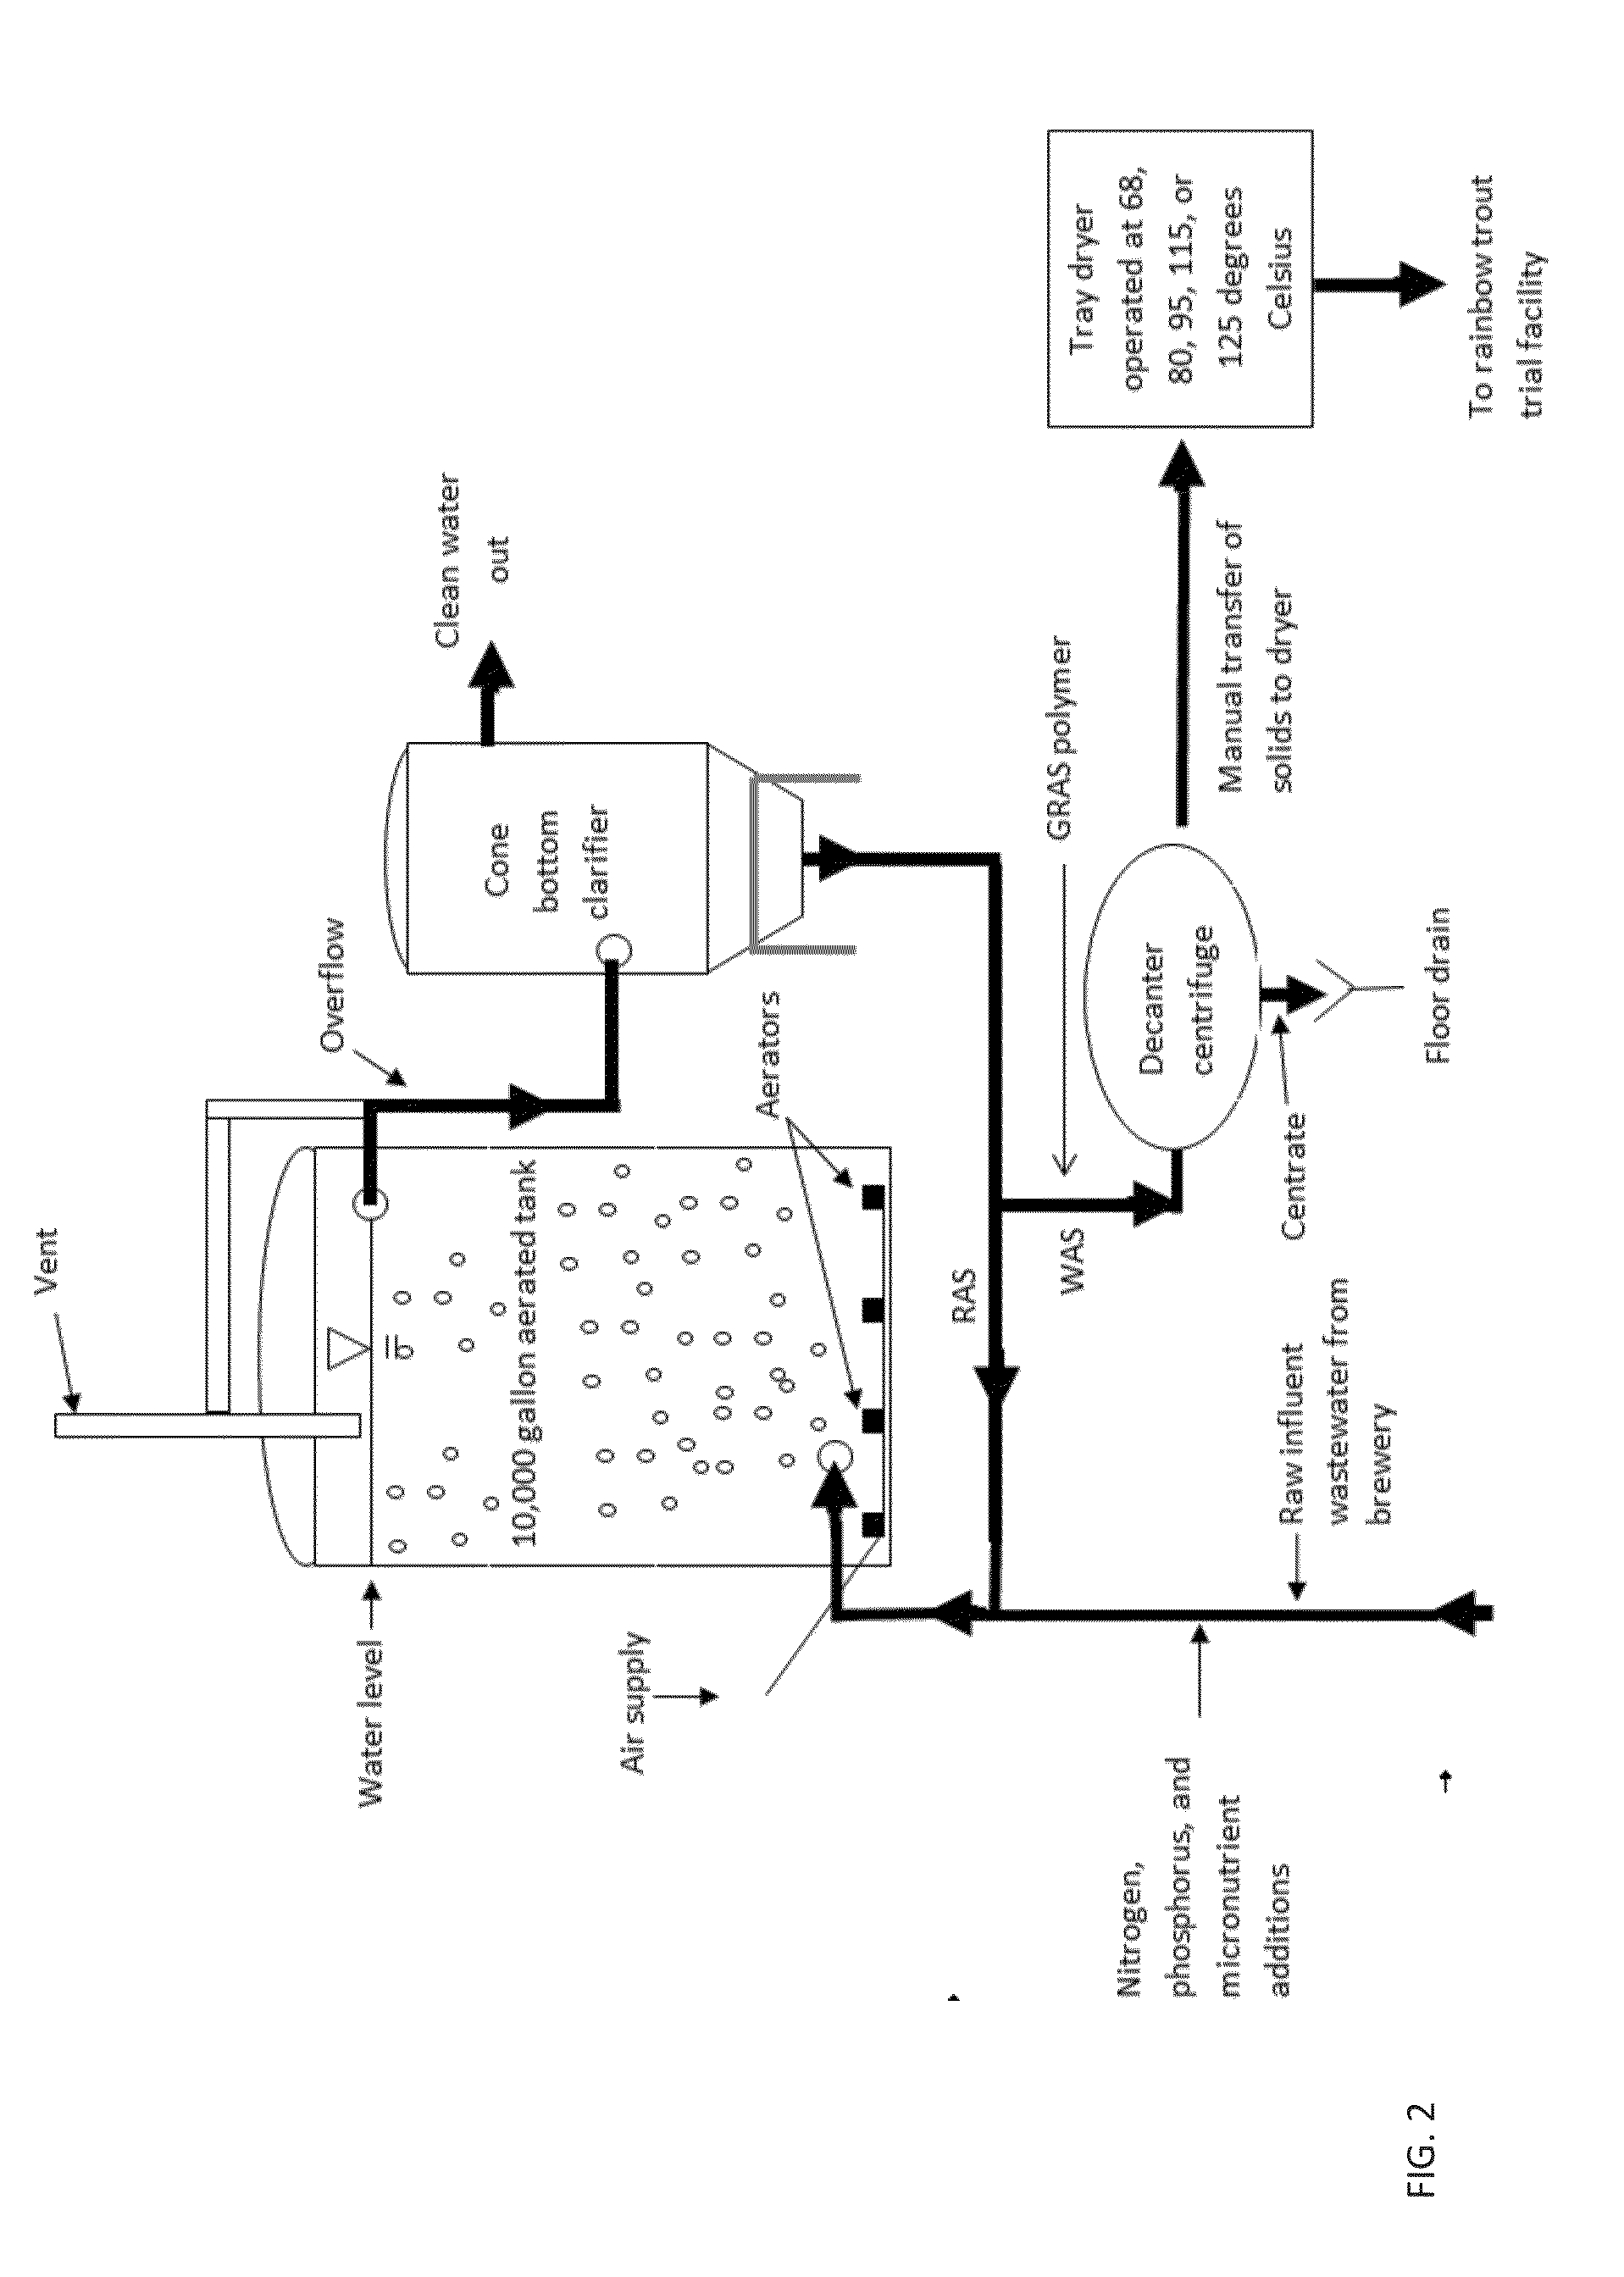 Methods of processing waste activated sludge